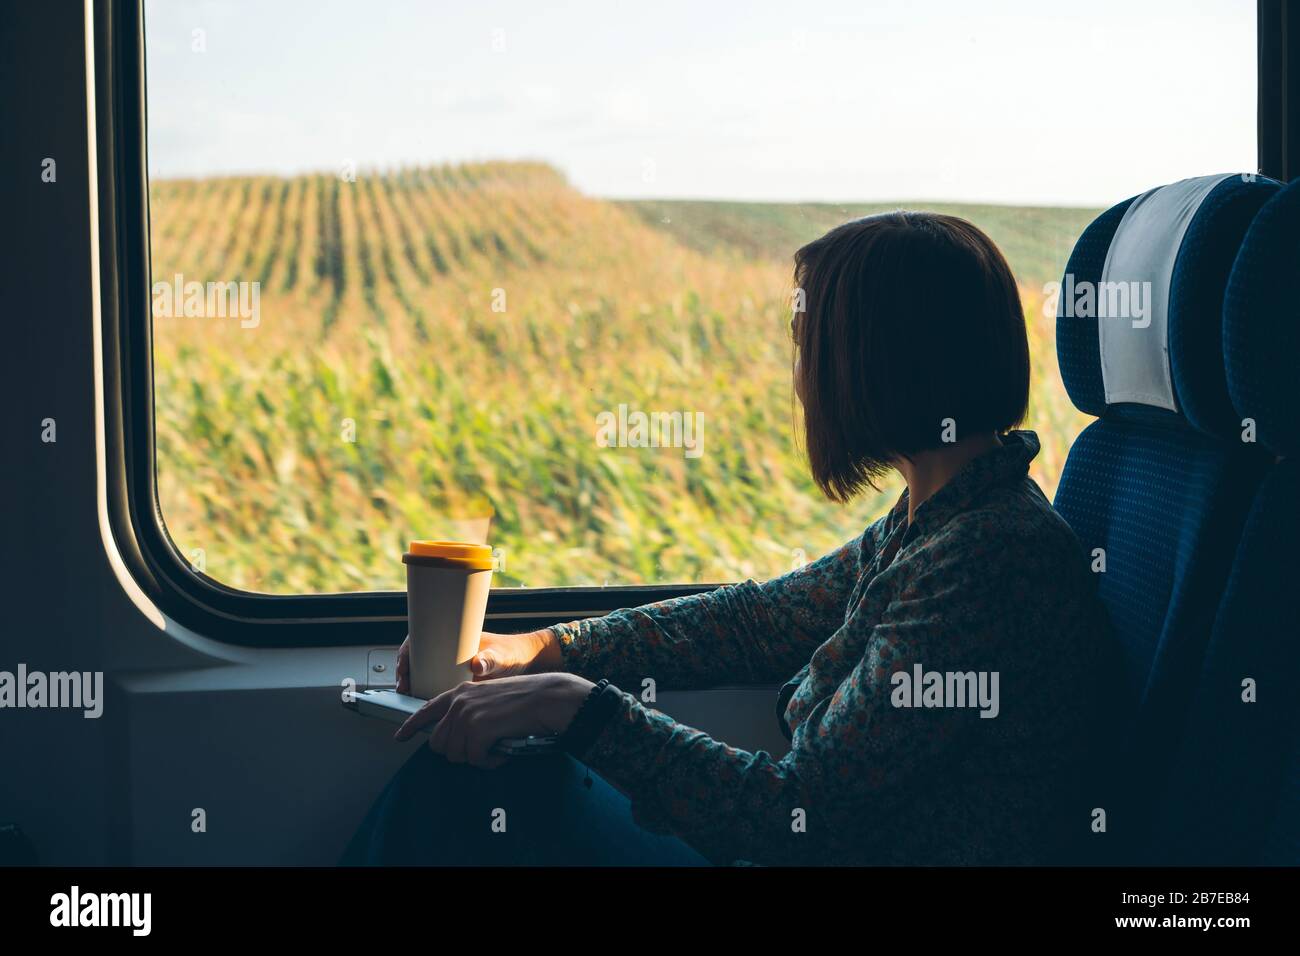 A woman sitting by the window of a commuter train with a laptop and coffee cup Stock Photo